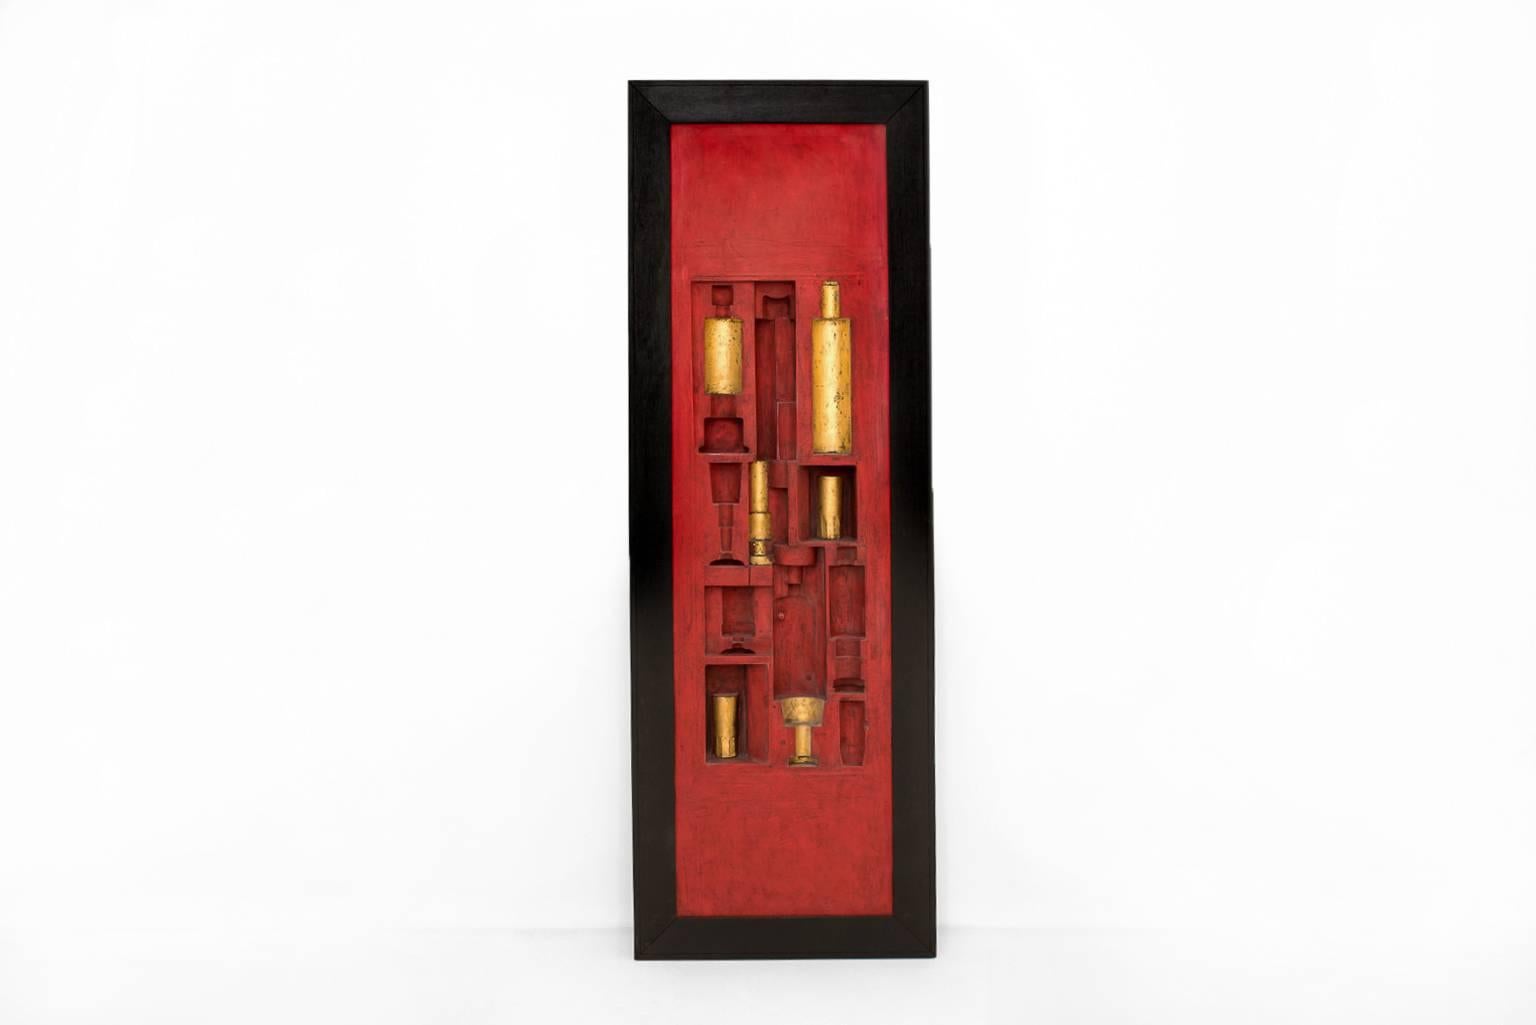 Unique wall panel by Victor Cerrato, Italy, 1967. The wooden panel shows different shapes of glasses and bottles, it's finished with thick layers of red lacquer some and gold leaf. The artwork is made with professional precision but finished in